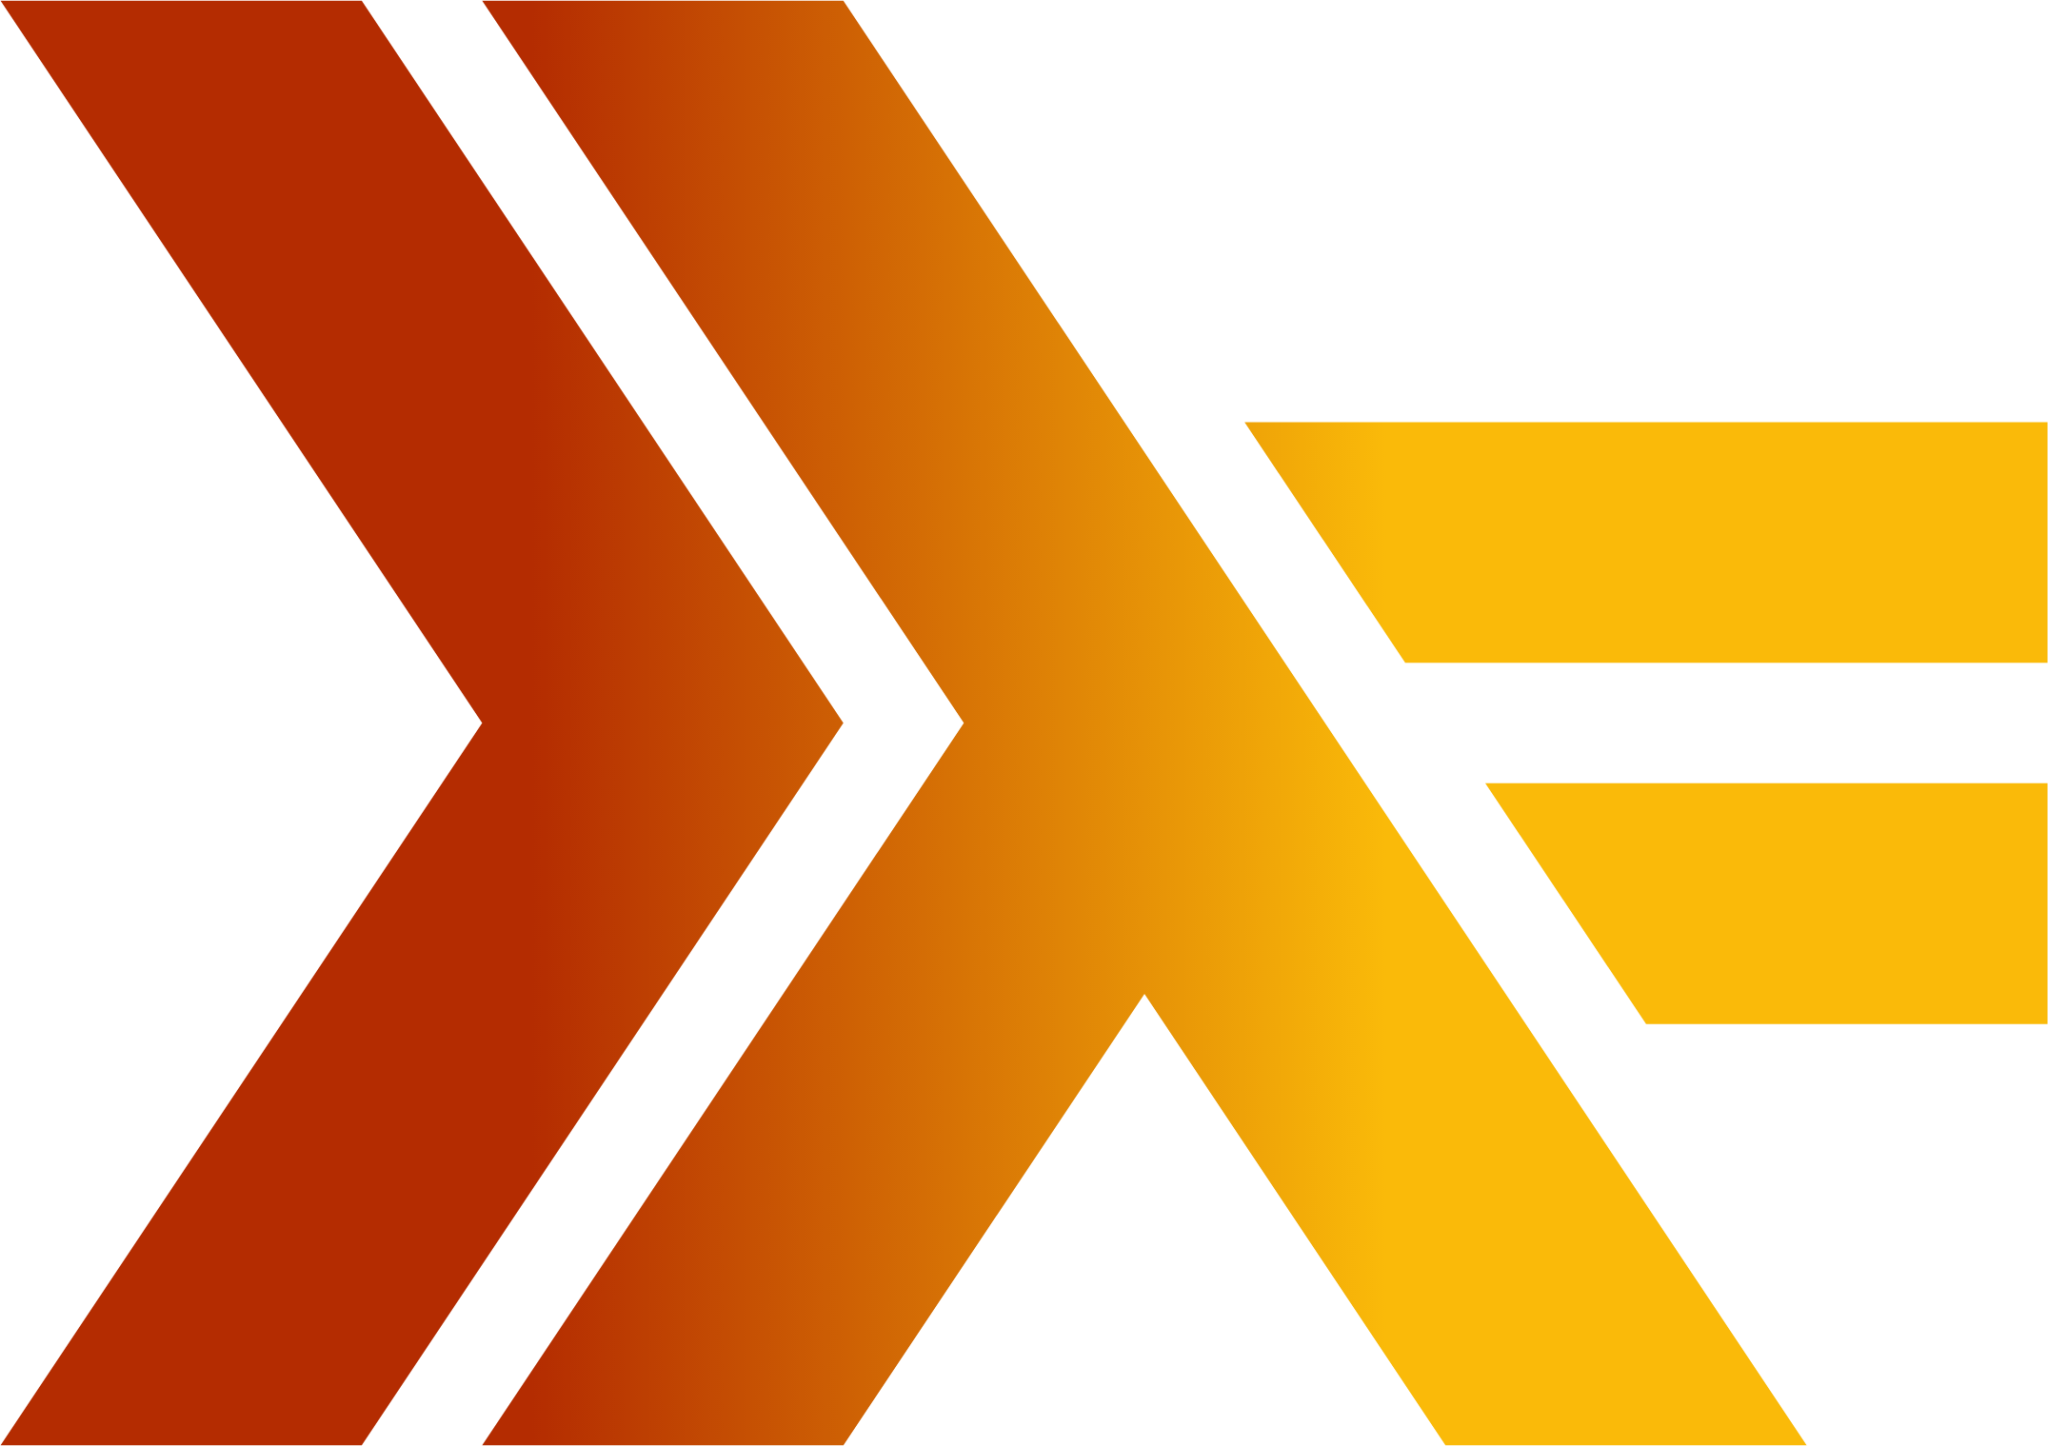 file type haskell2 icon